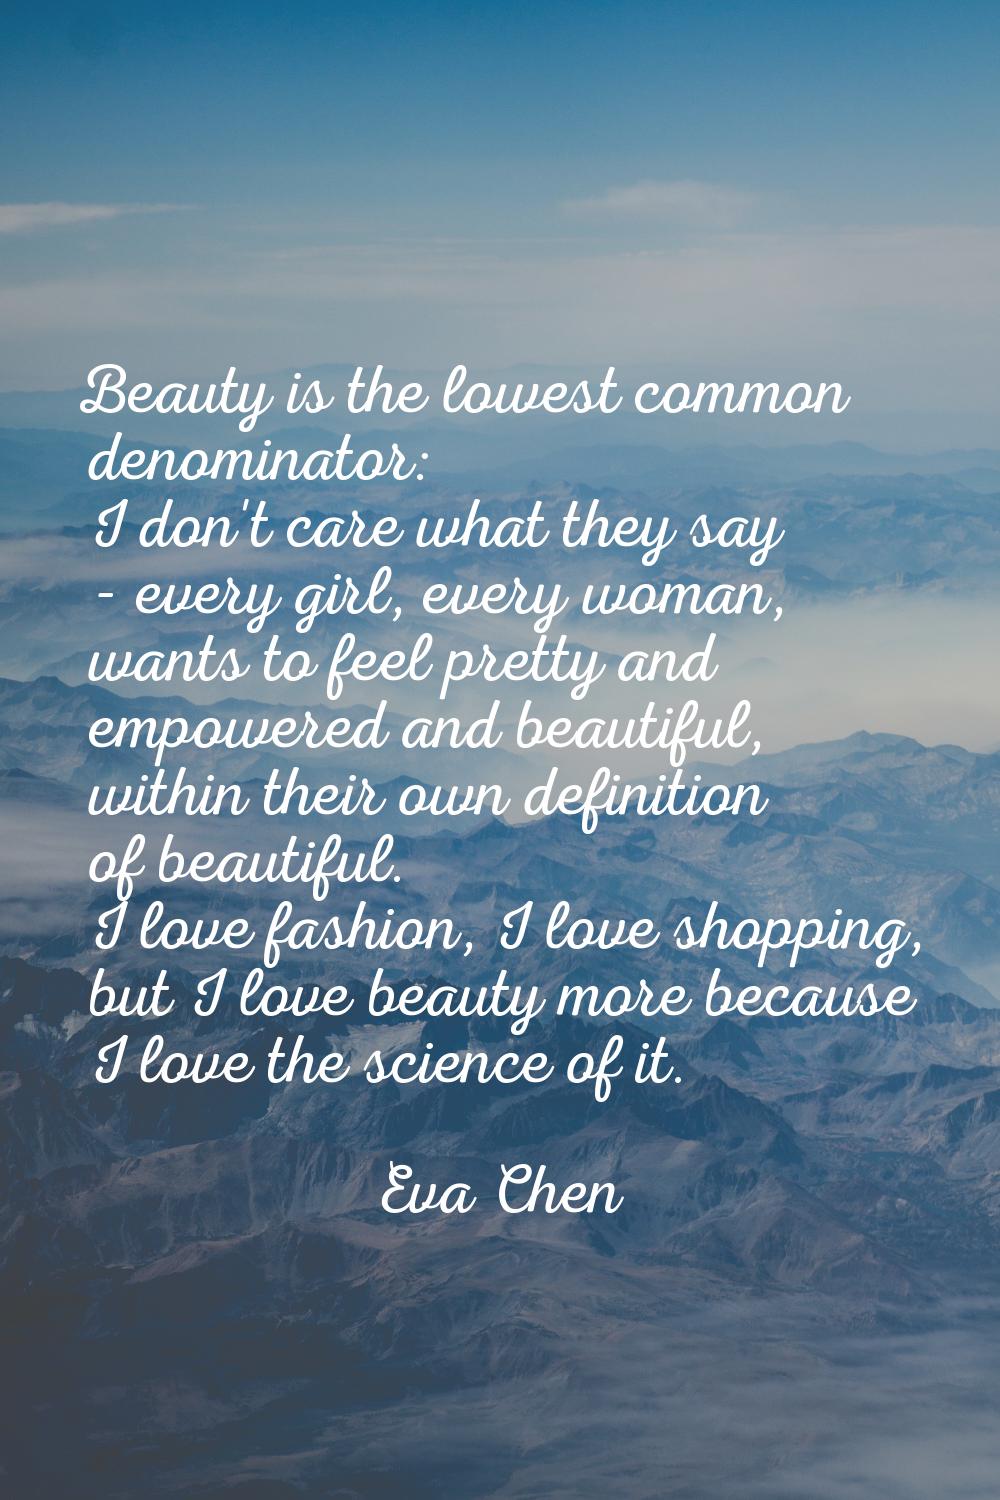 Beauty is the lowest common denominator: I don't care what they say - every girl, every woman, want